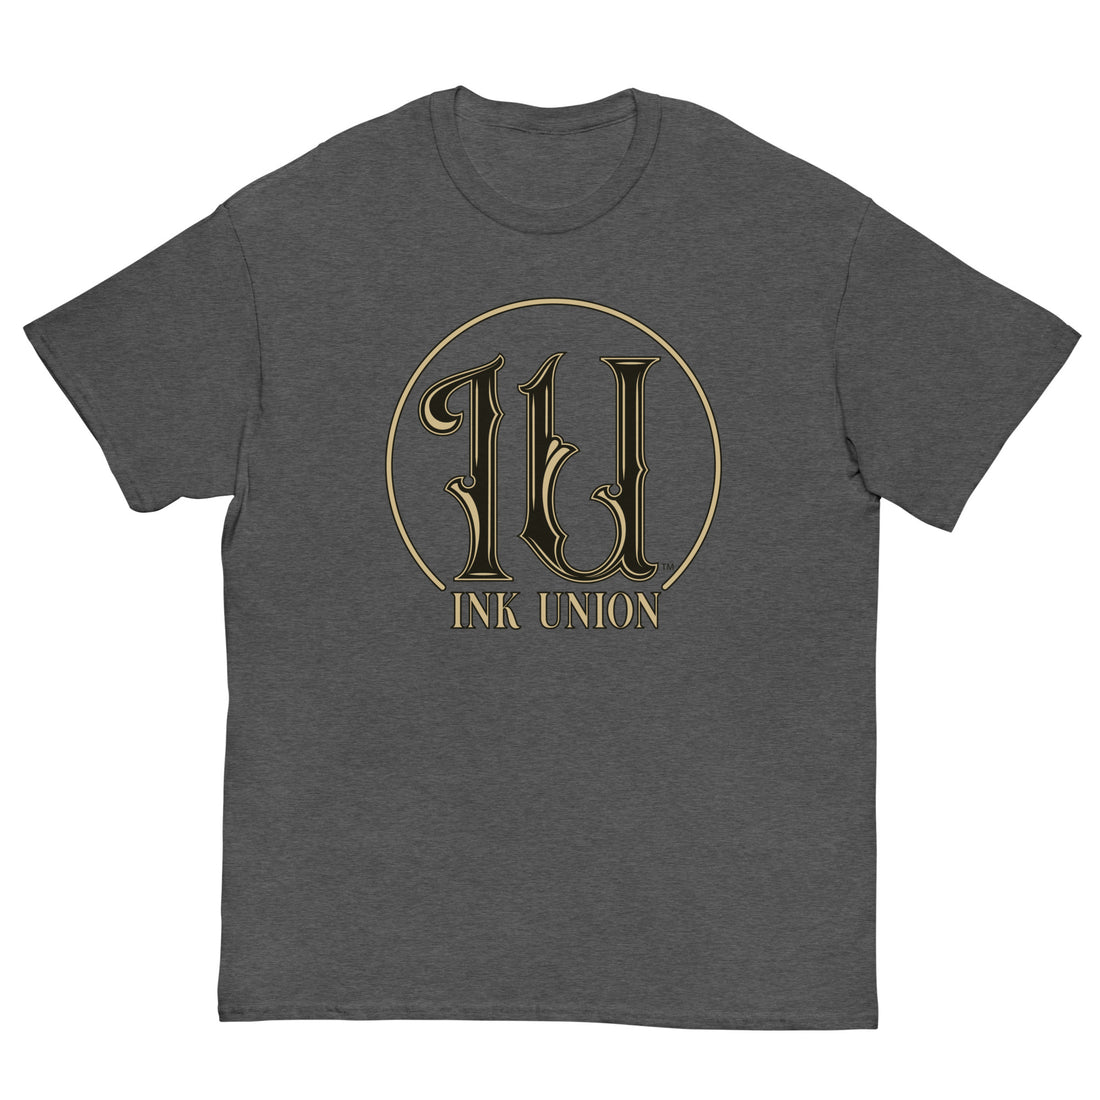 Ink Union Clothing Co. dark grey t-shirt featuring the Ink Union ring logo in black and gold.